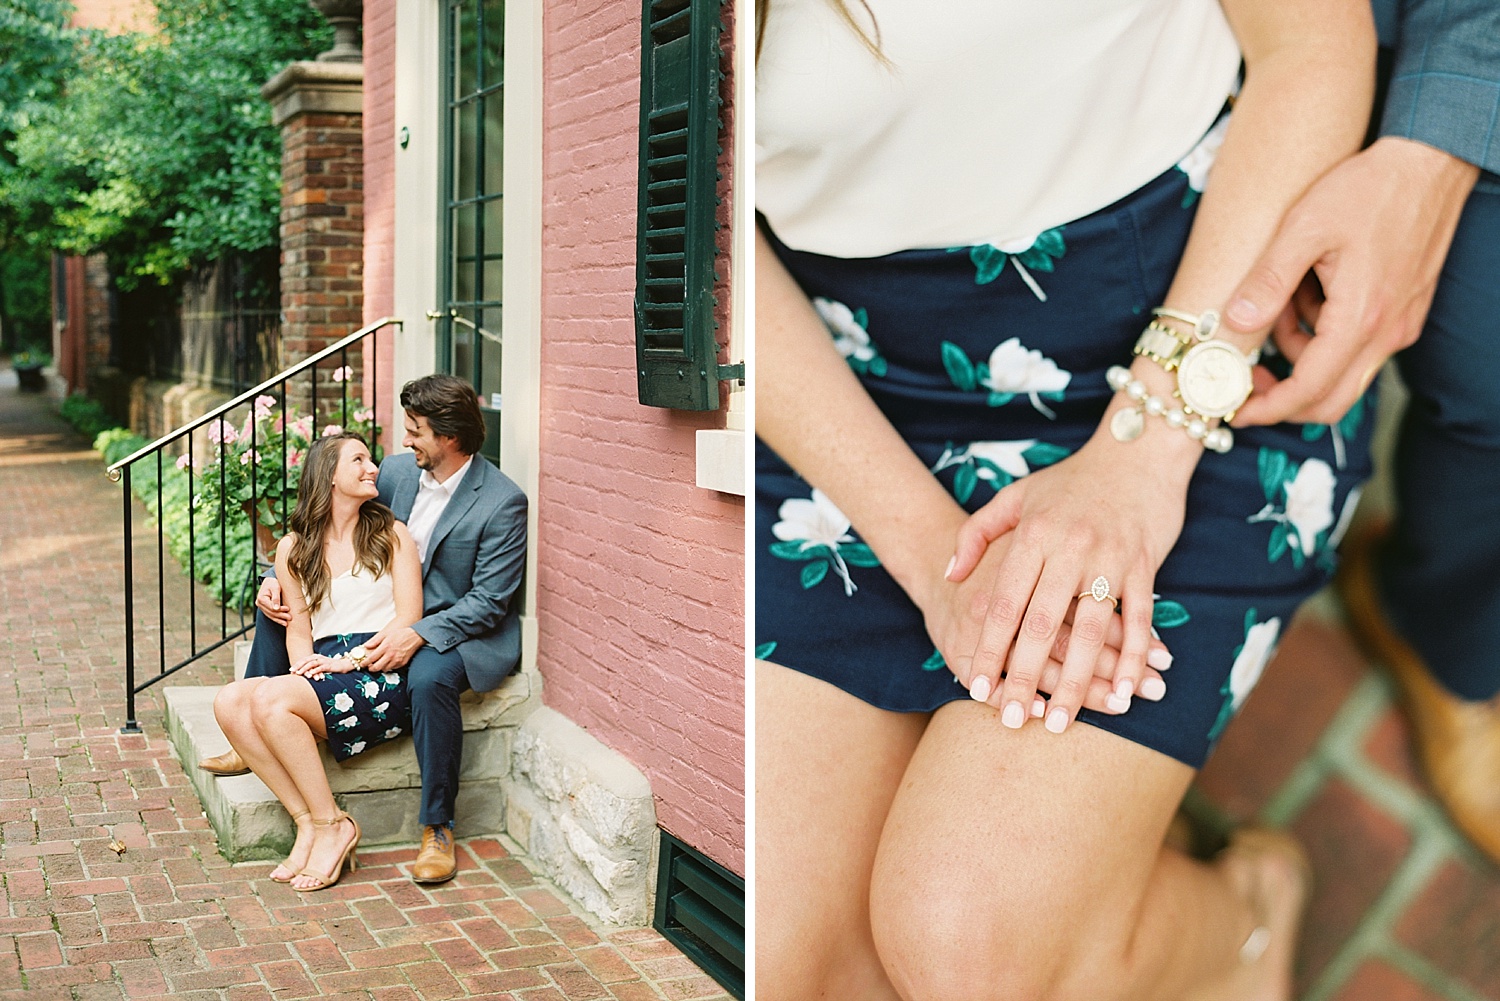 Downtown Lexington Engagement Session Talon Winery Picnic Engagement Session Gal Meets Glam Anthropologie Dress Laura Bodnar Photography Lexington Wedding Photographer Film Photography_0003-1.jpg